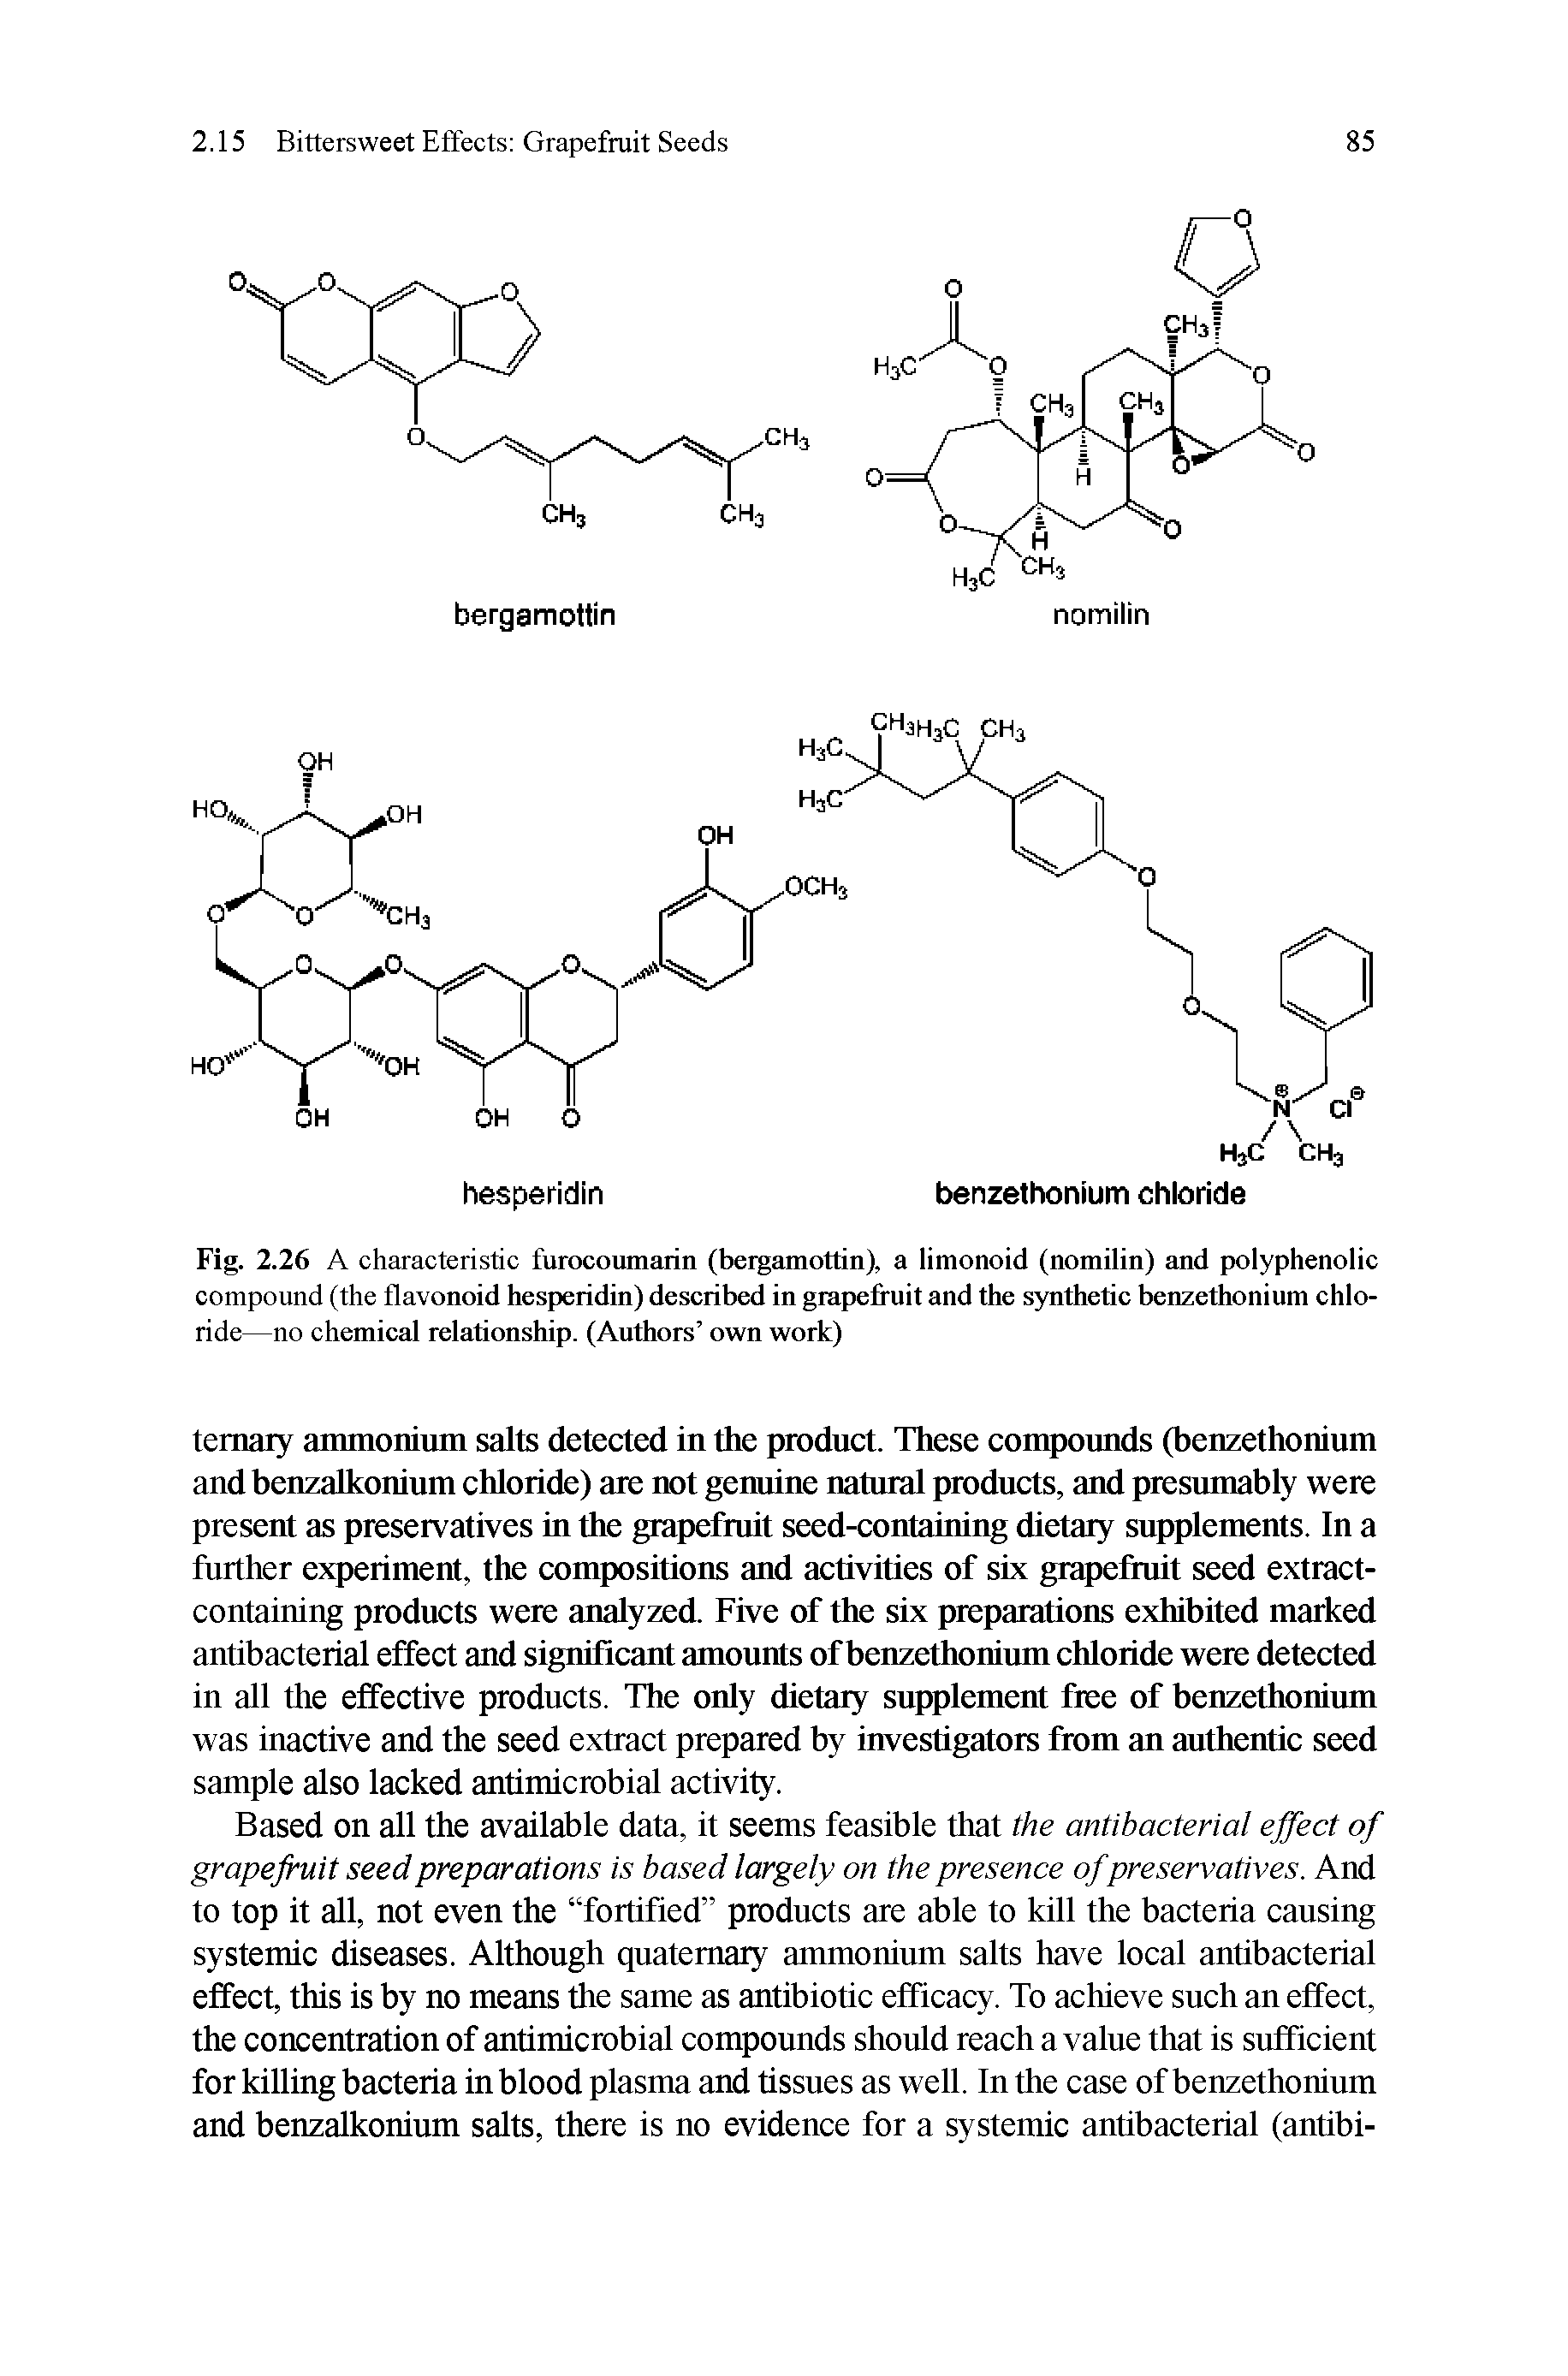 Fig. 2.26 A characteristic furocoumaiin (bergamottin), a limonoid (nomilin) and polyphenolic compound (the flavonoid hesperidin) described in grapefruit and the synthetic benzethonium chloride—no chemical relationship. (Authors own work)...